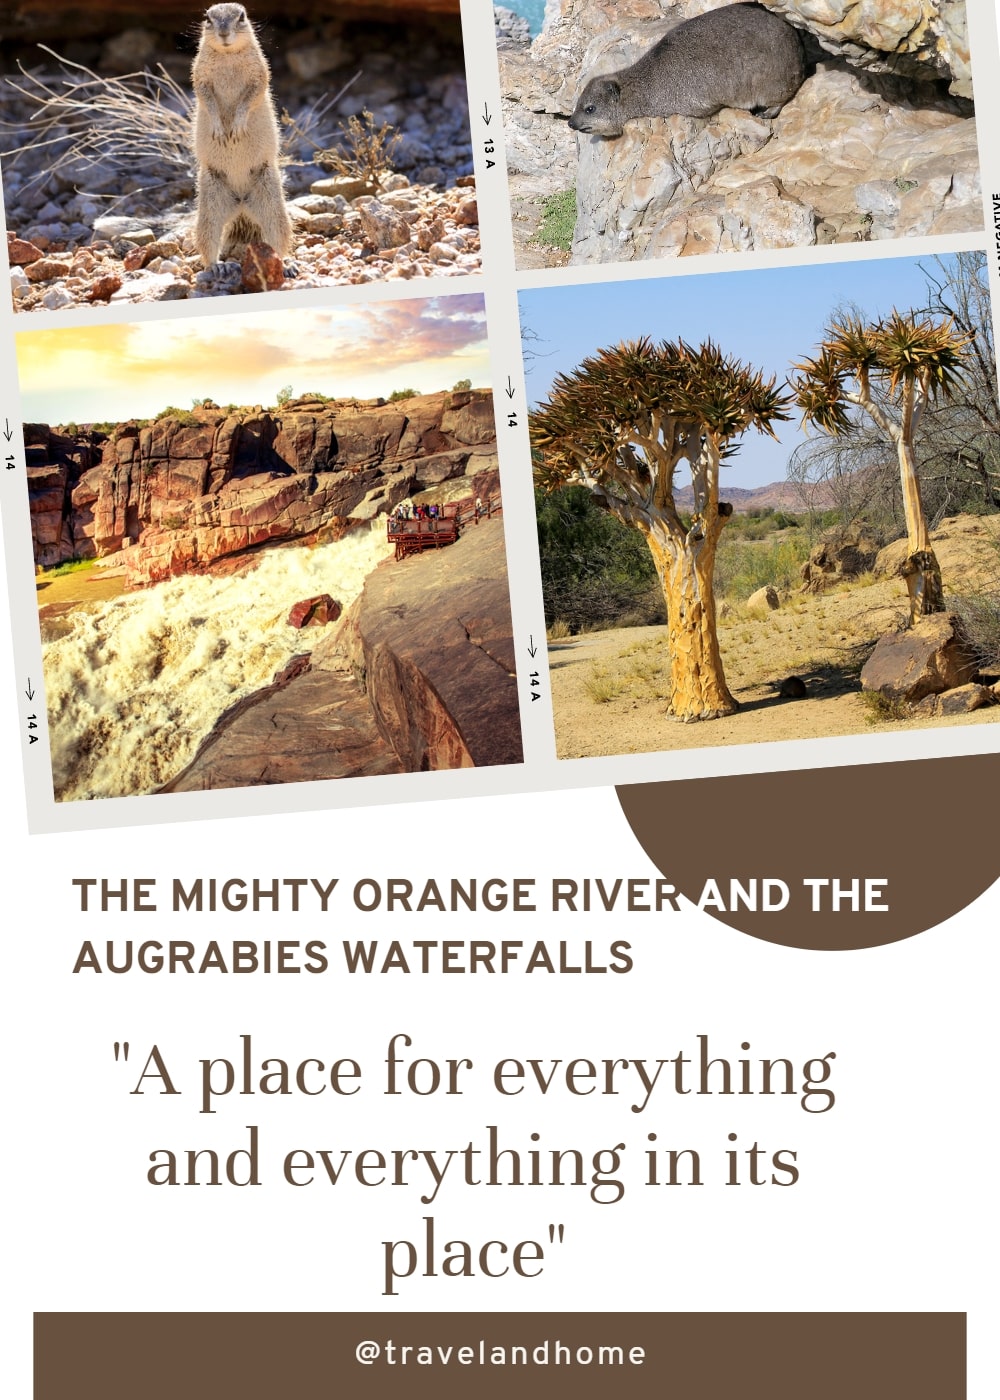 visit the best in the North Cape province South Africa Augrabies waterfalls hyrax orange river travel and home min